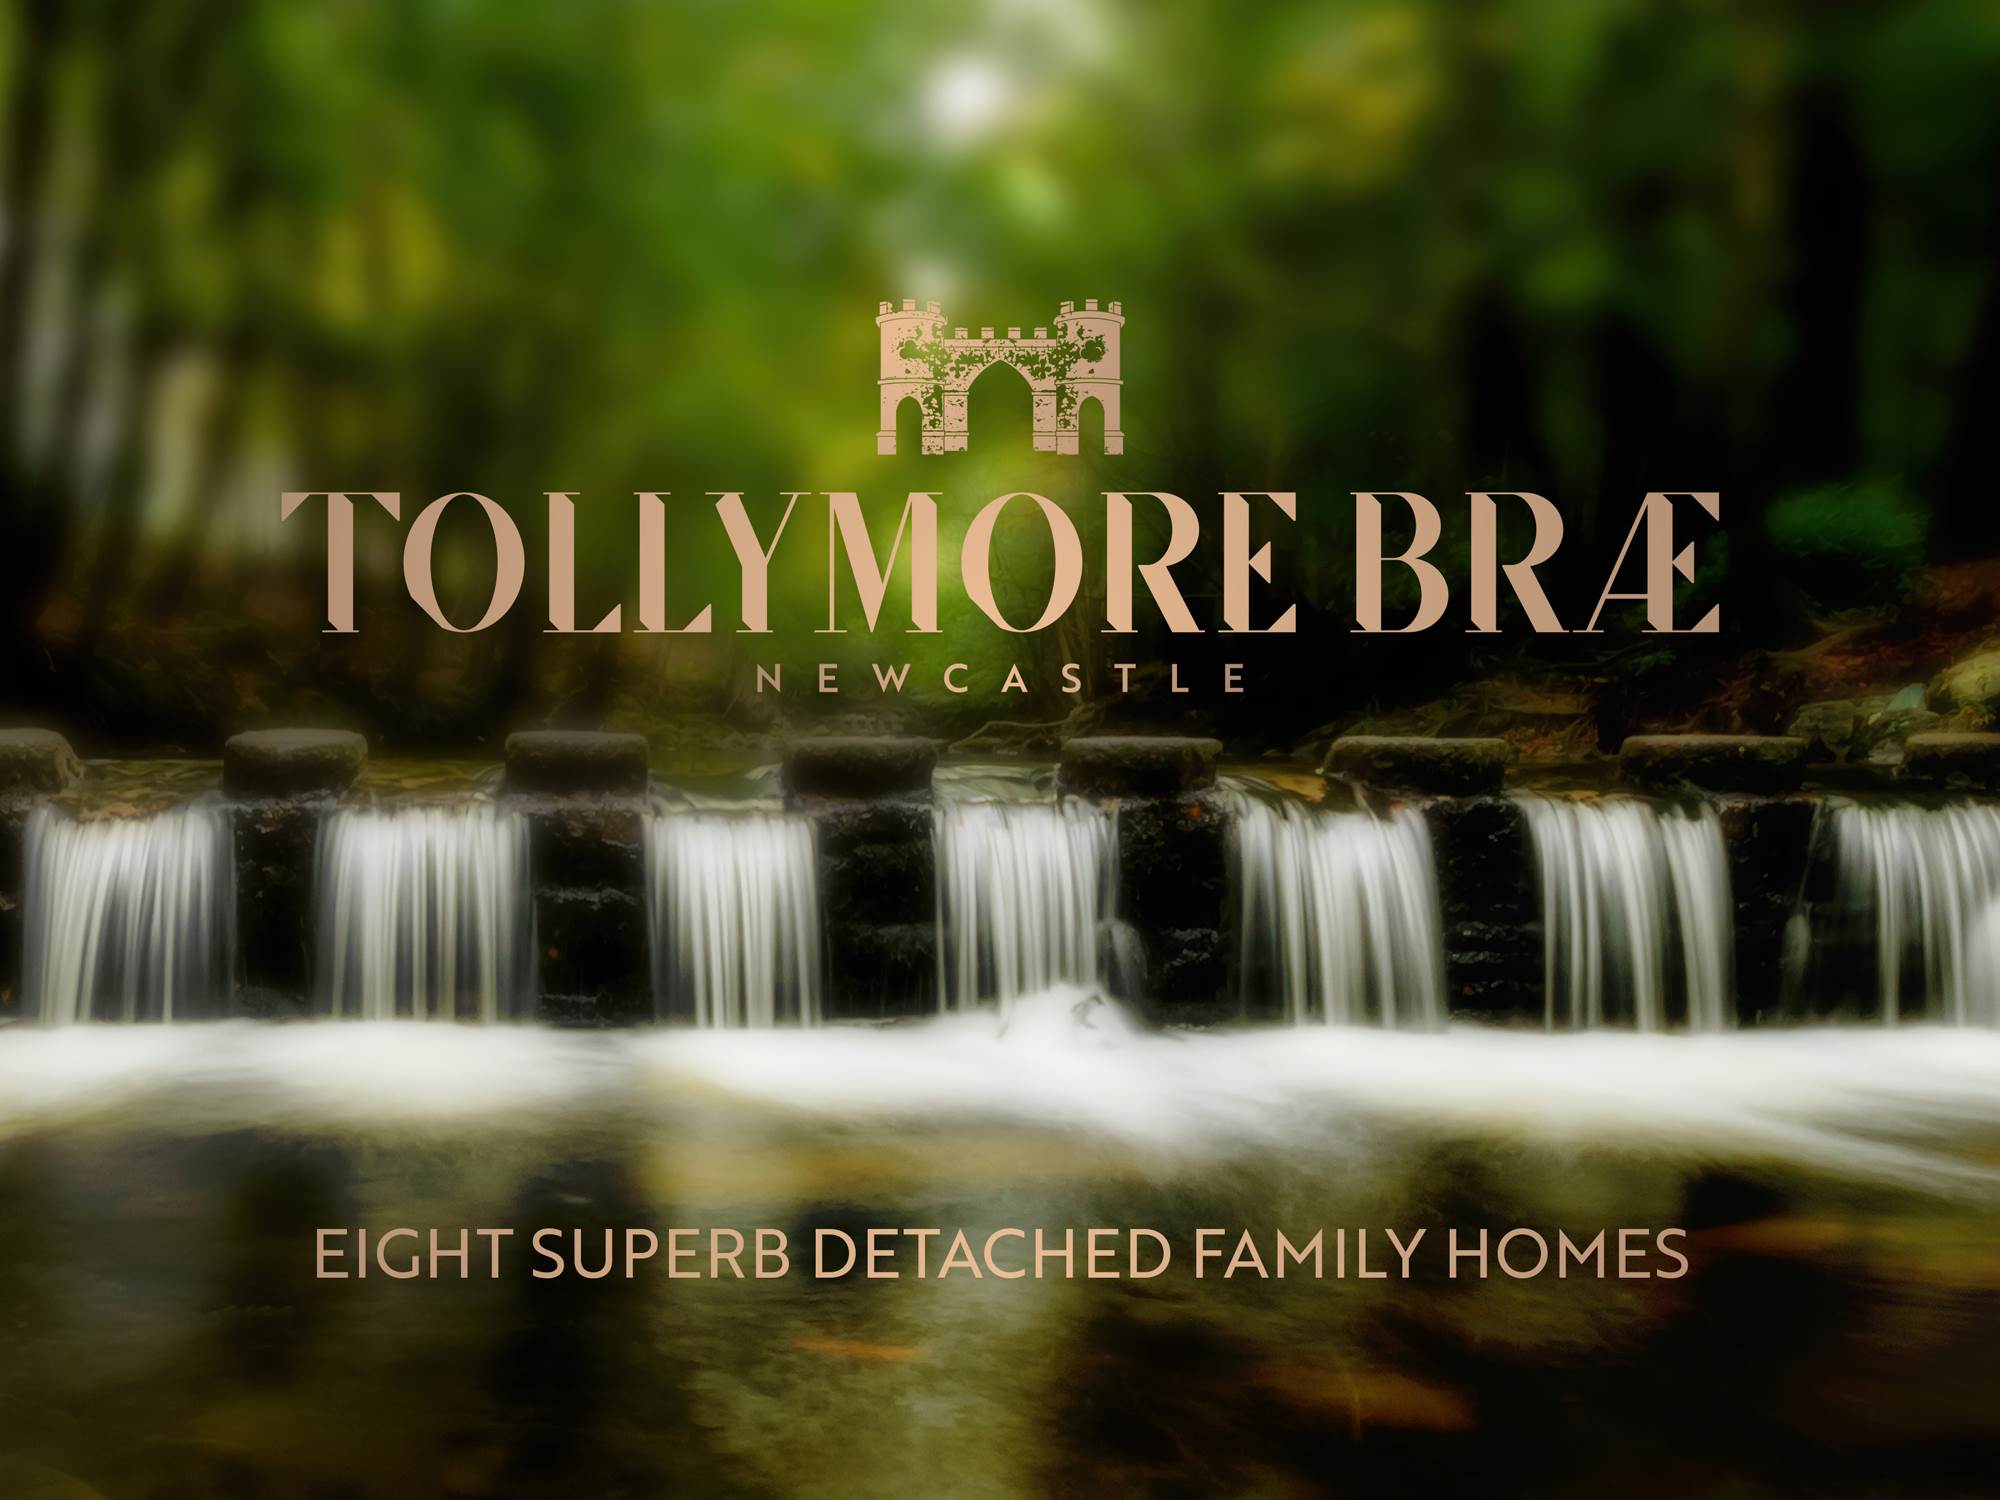 Site 8 Tollymore Brae